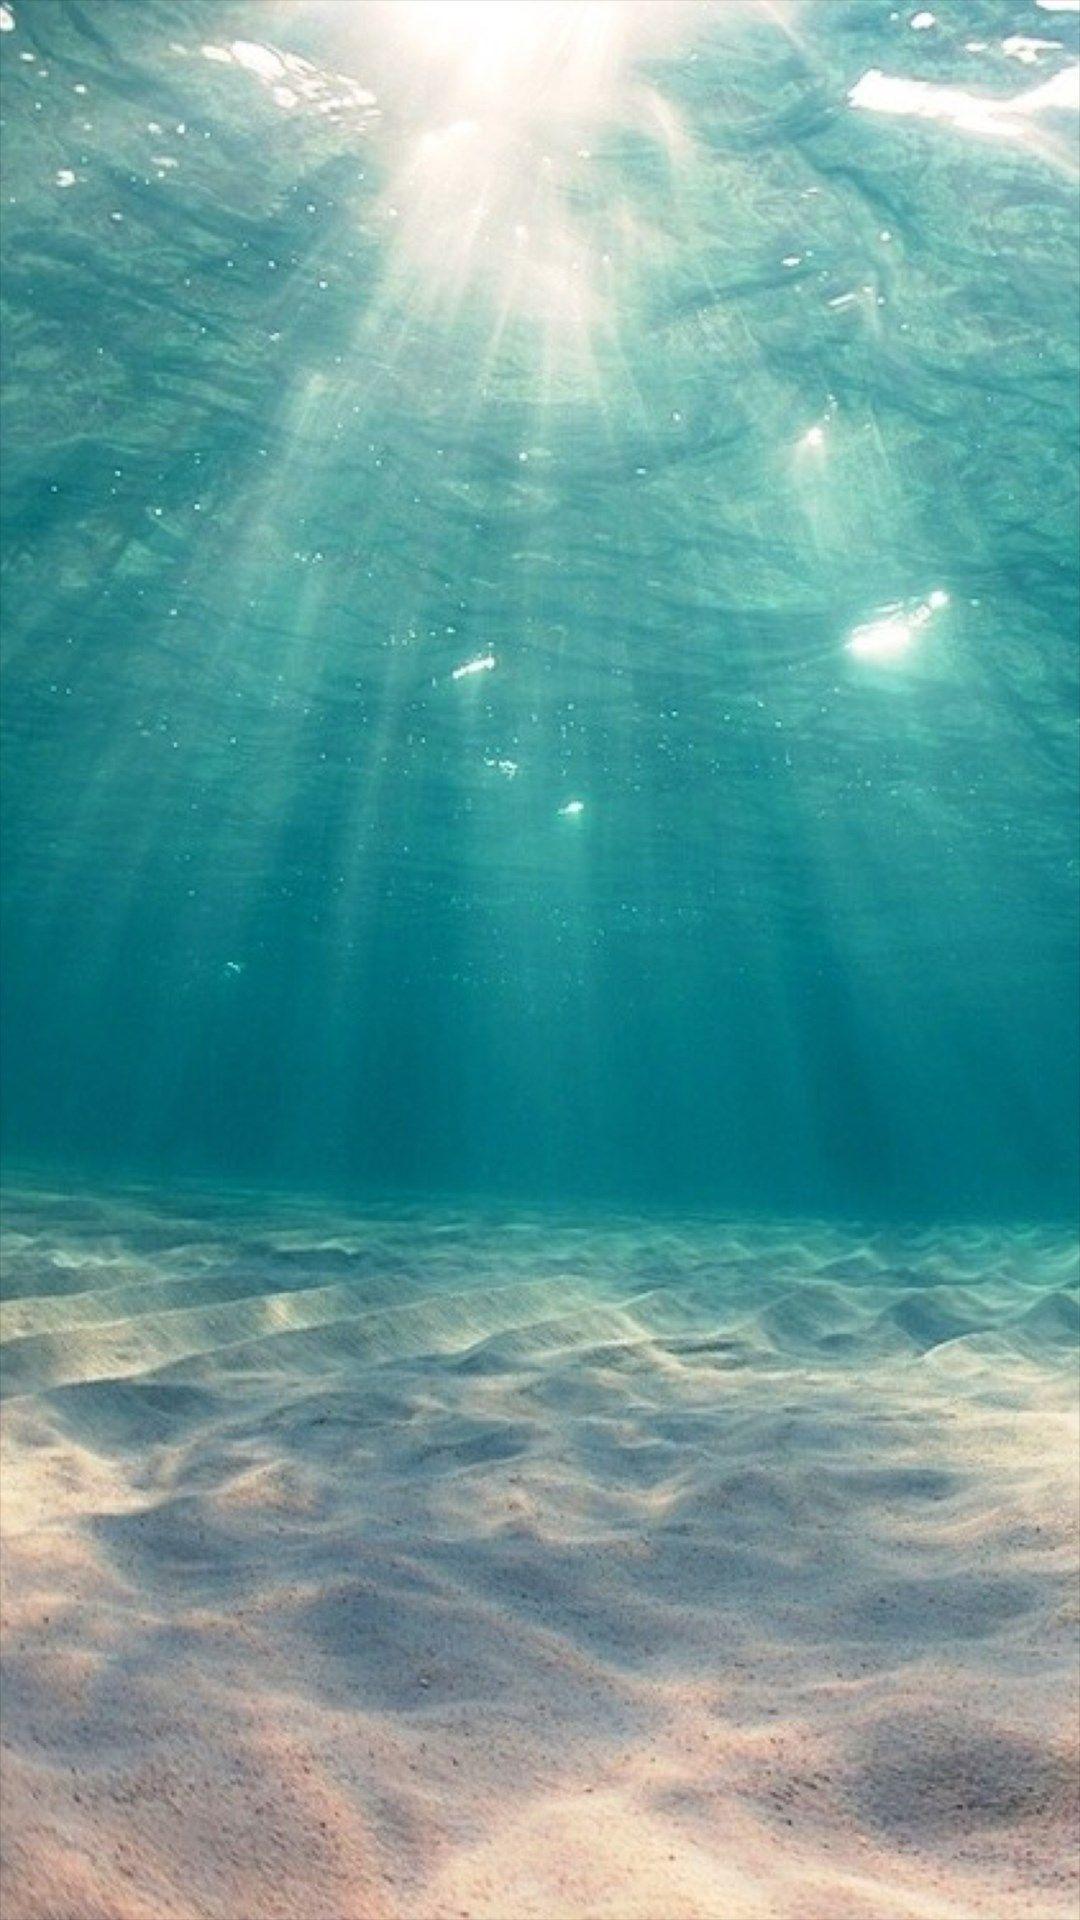 Under the Sea iPhone Wallpaper Free Under the Sea iPhone Background